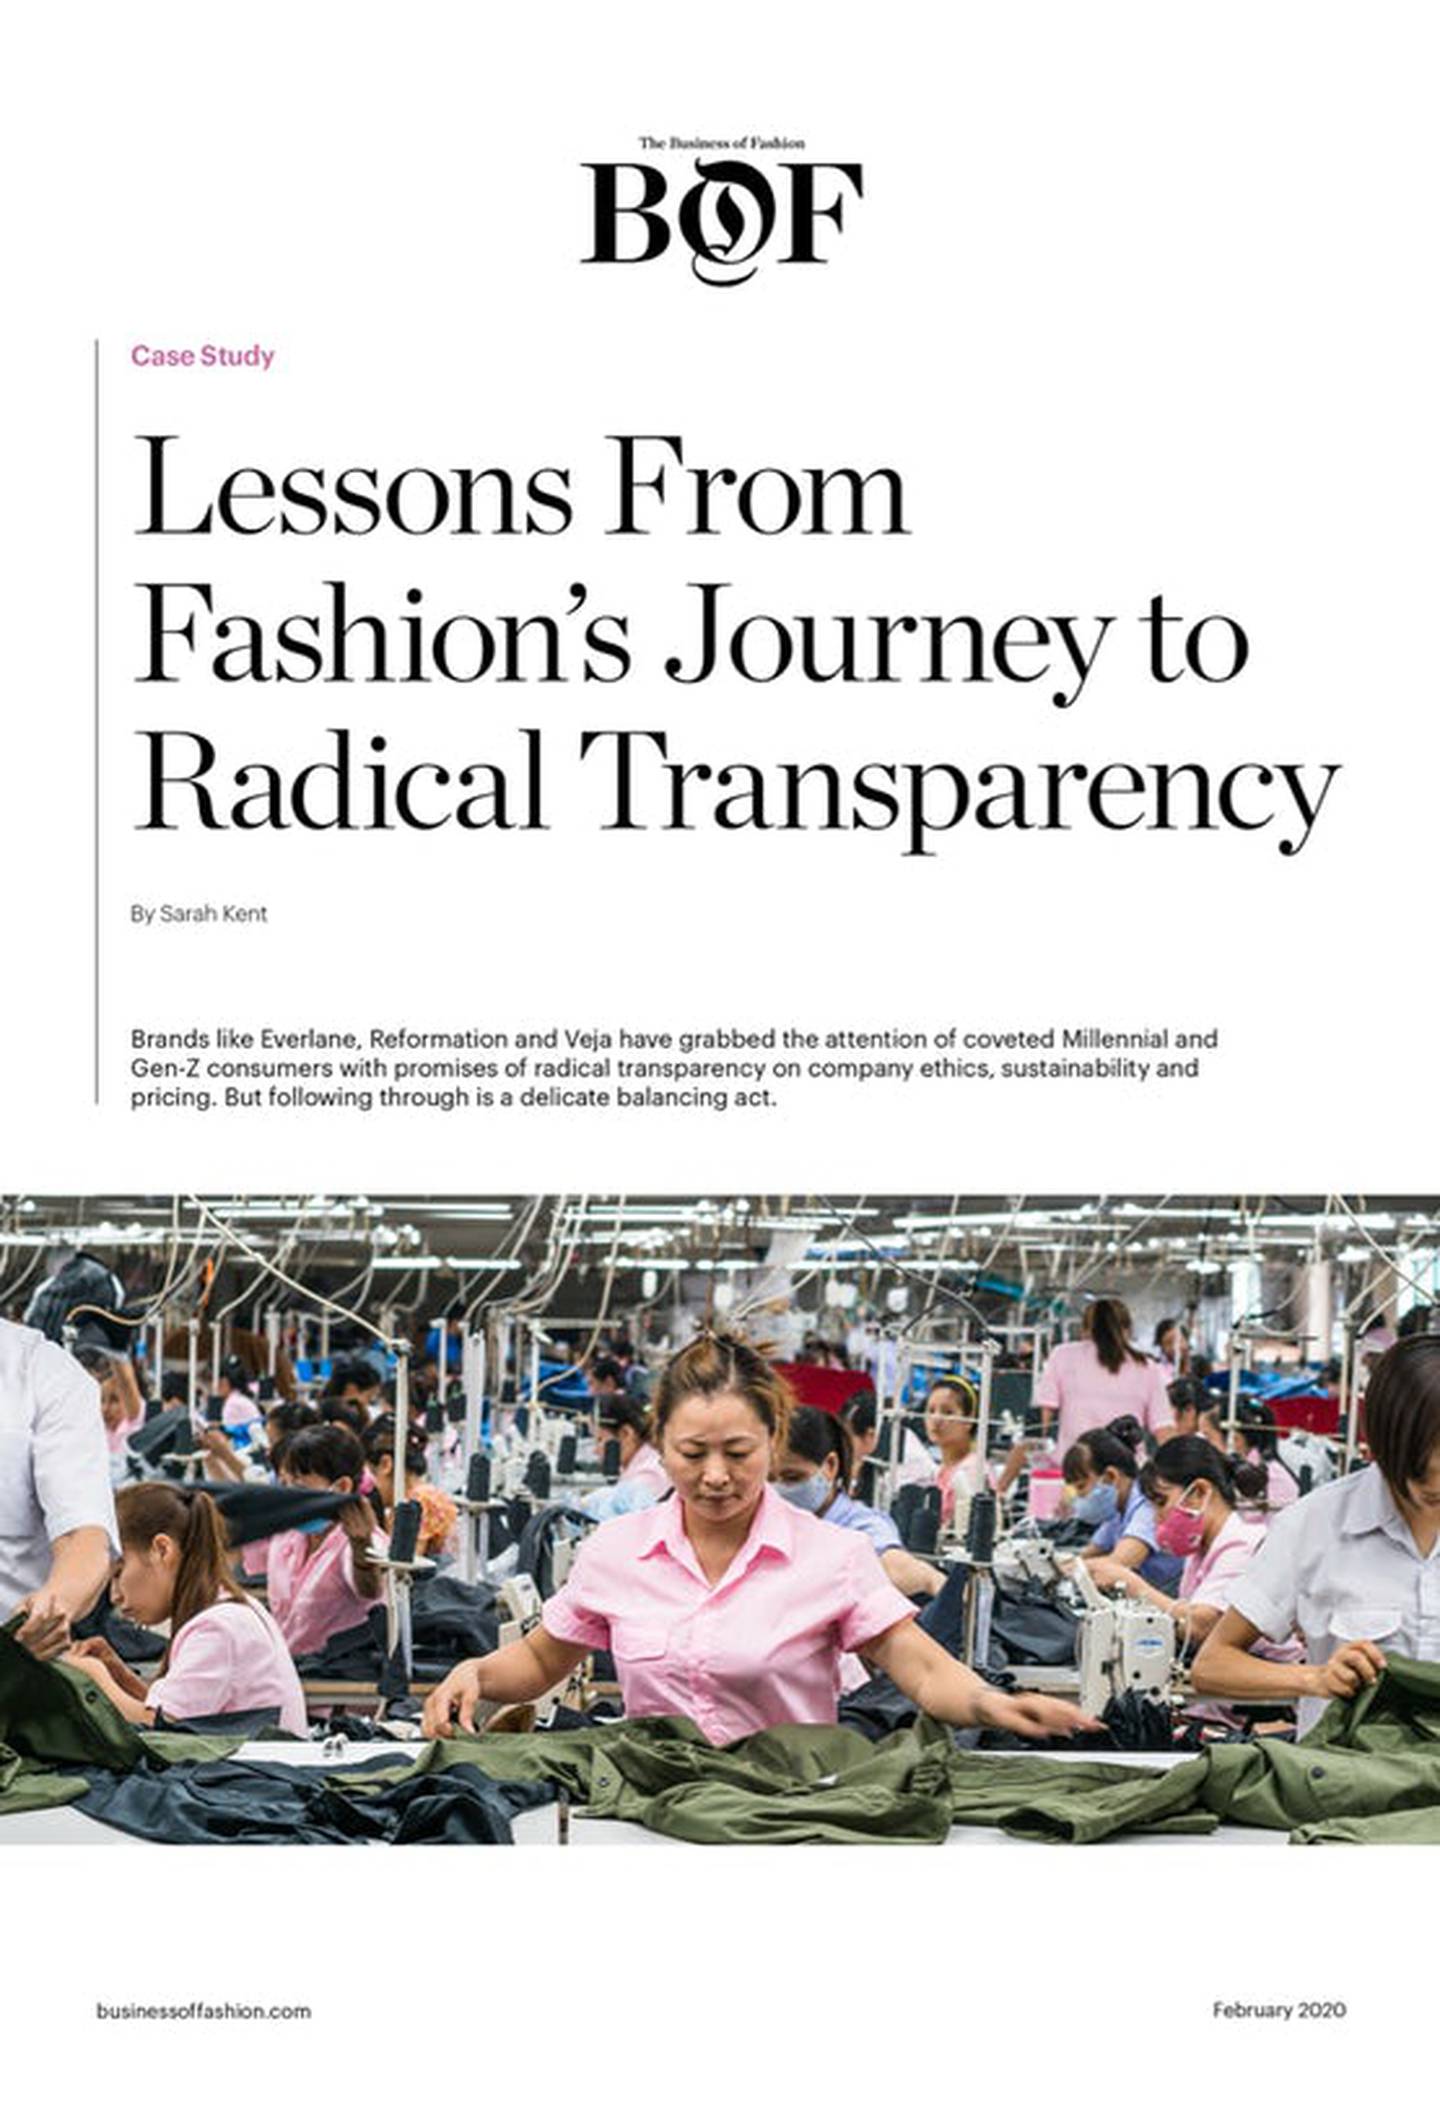 Lessons From Fashion's Journey to Radical Transparency Case Study